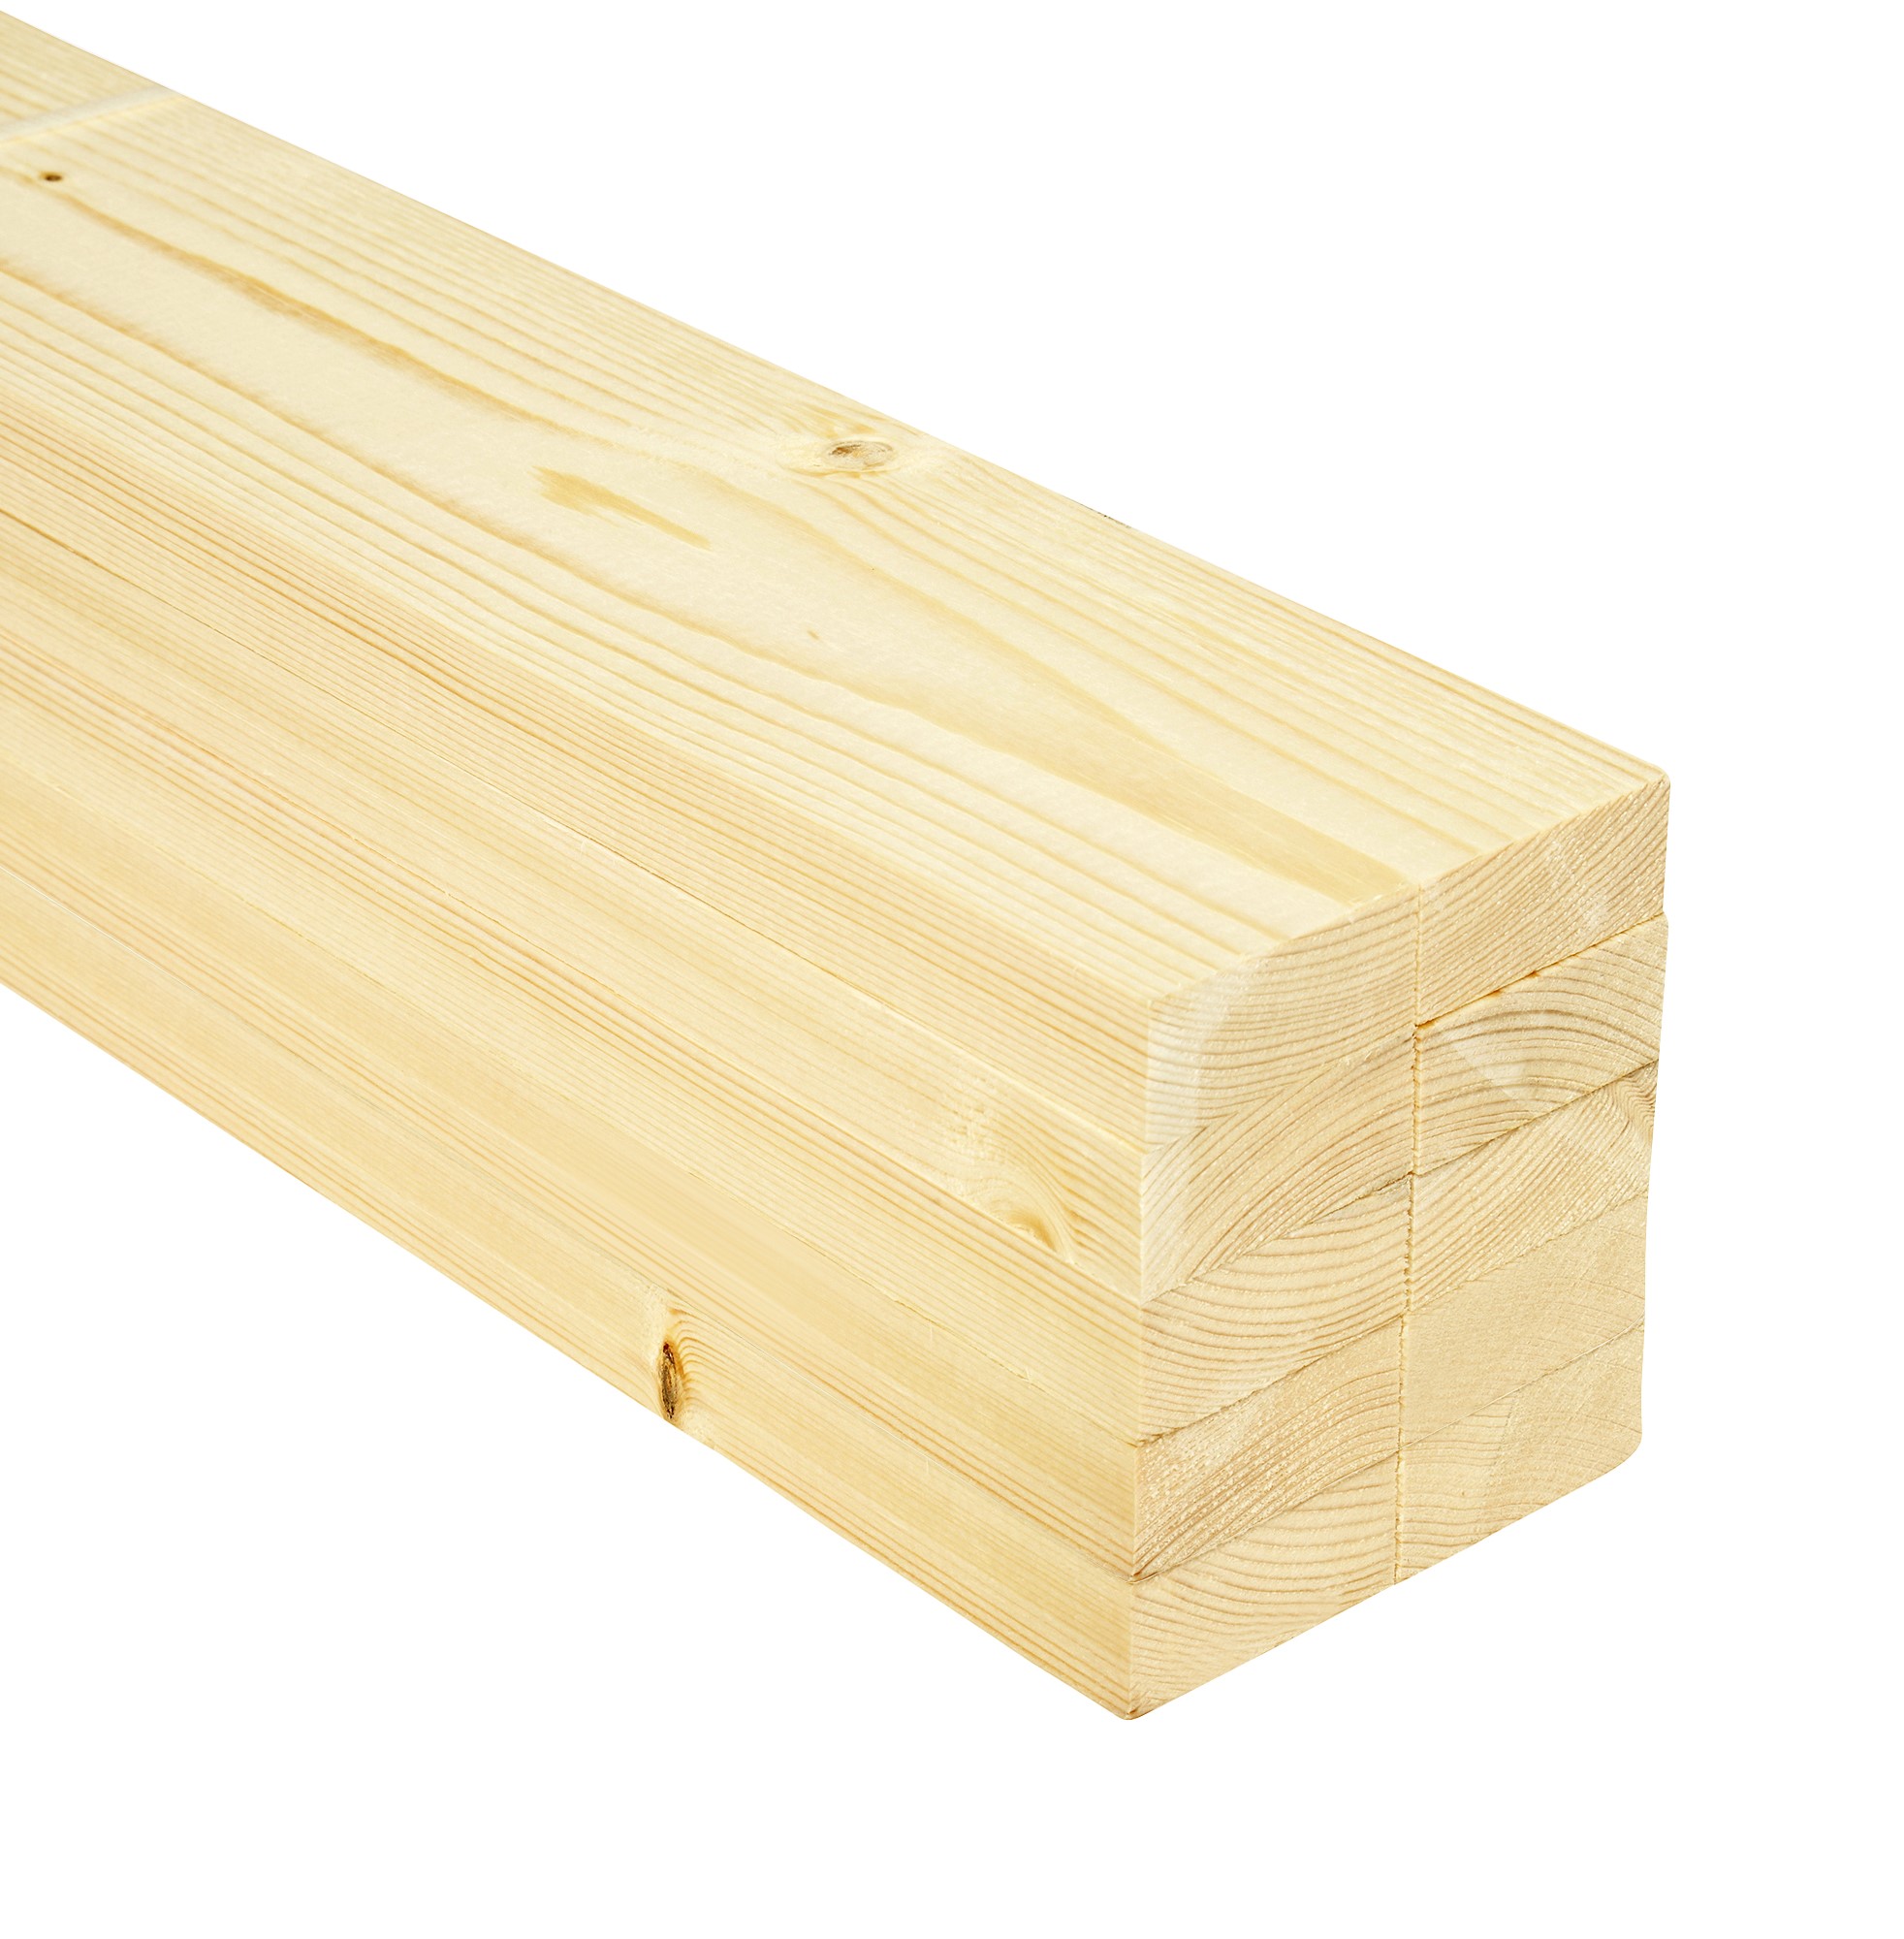 Image of Wickes Sawn Kiln Dried Timber - 22 x 47 x 2400mm - Pack of 10